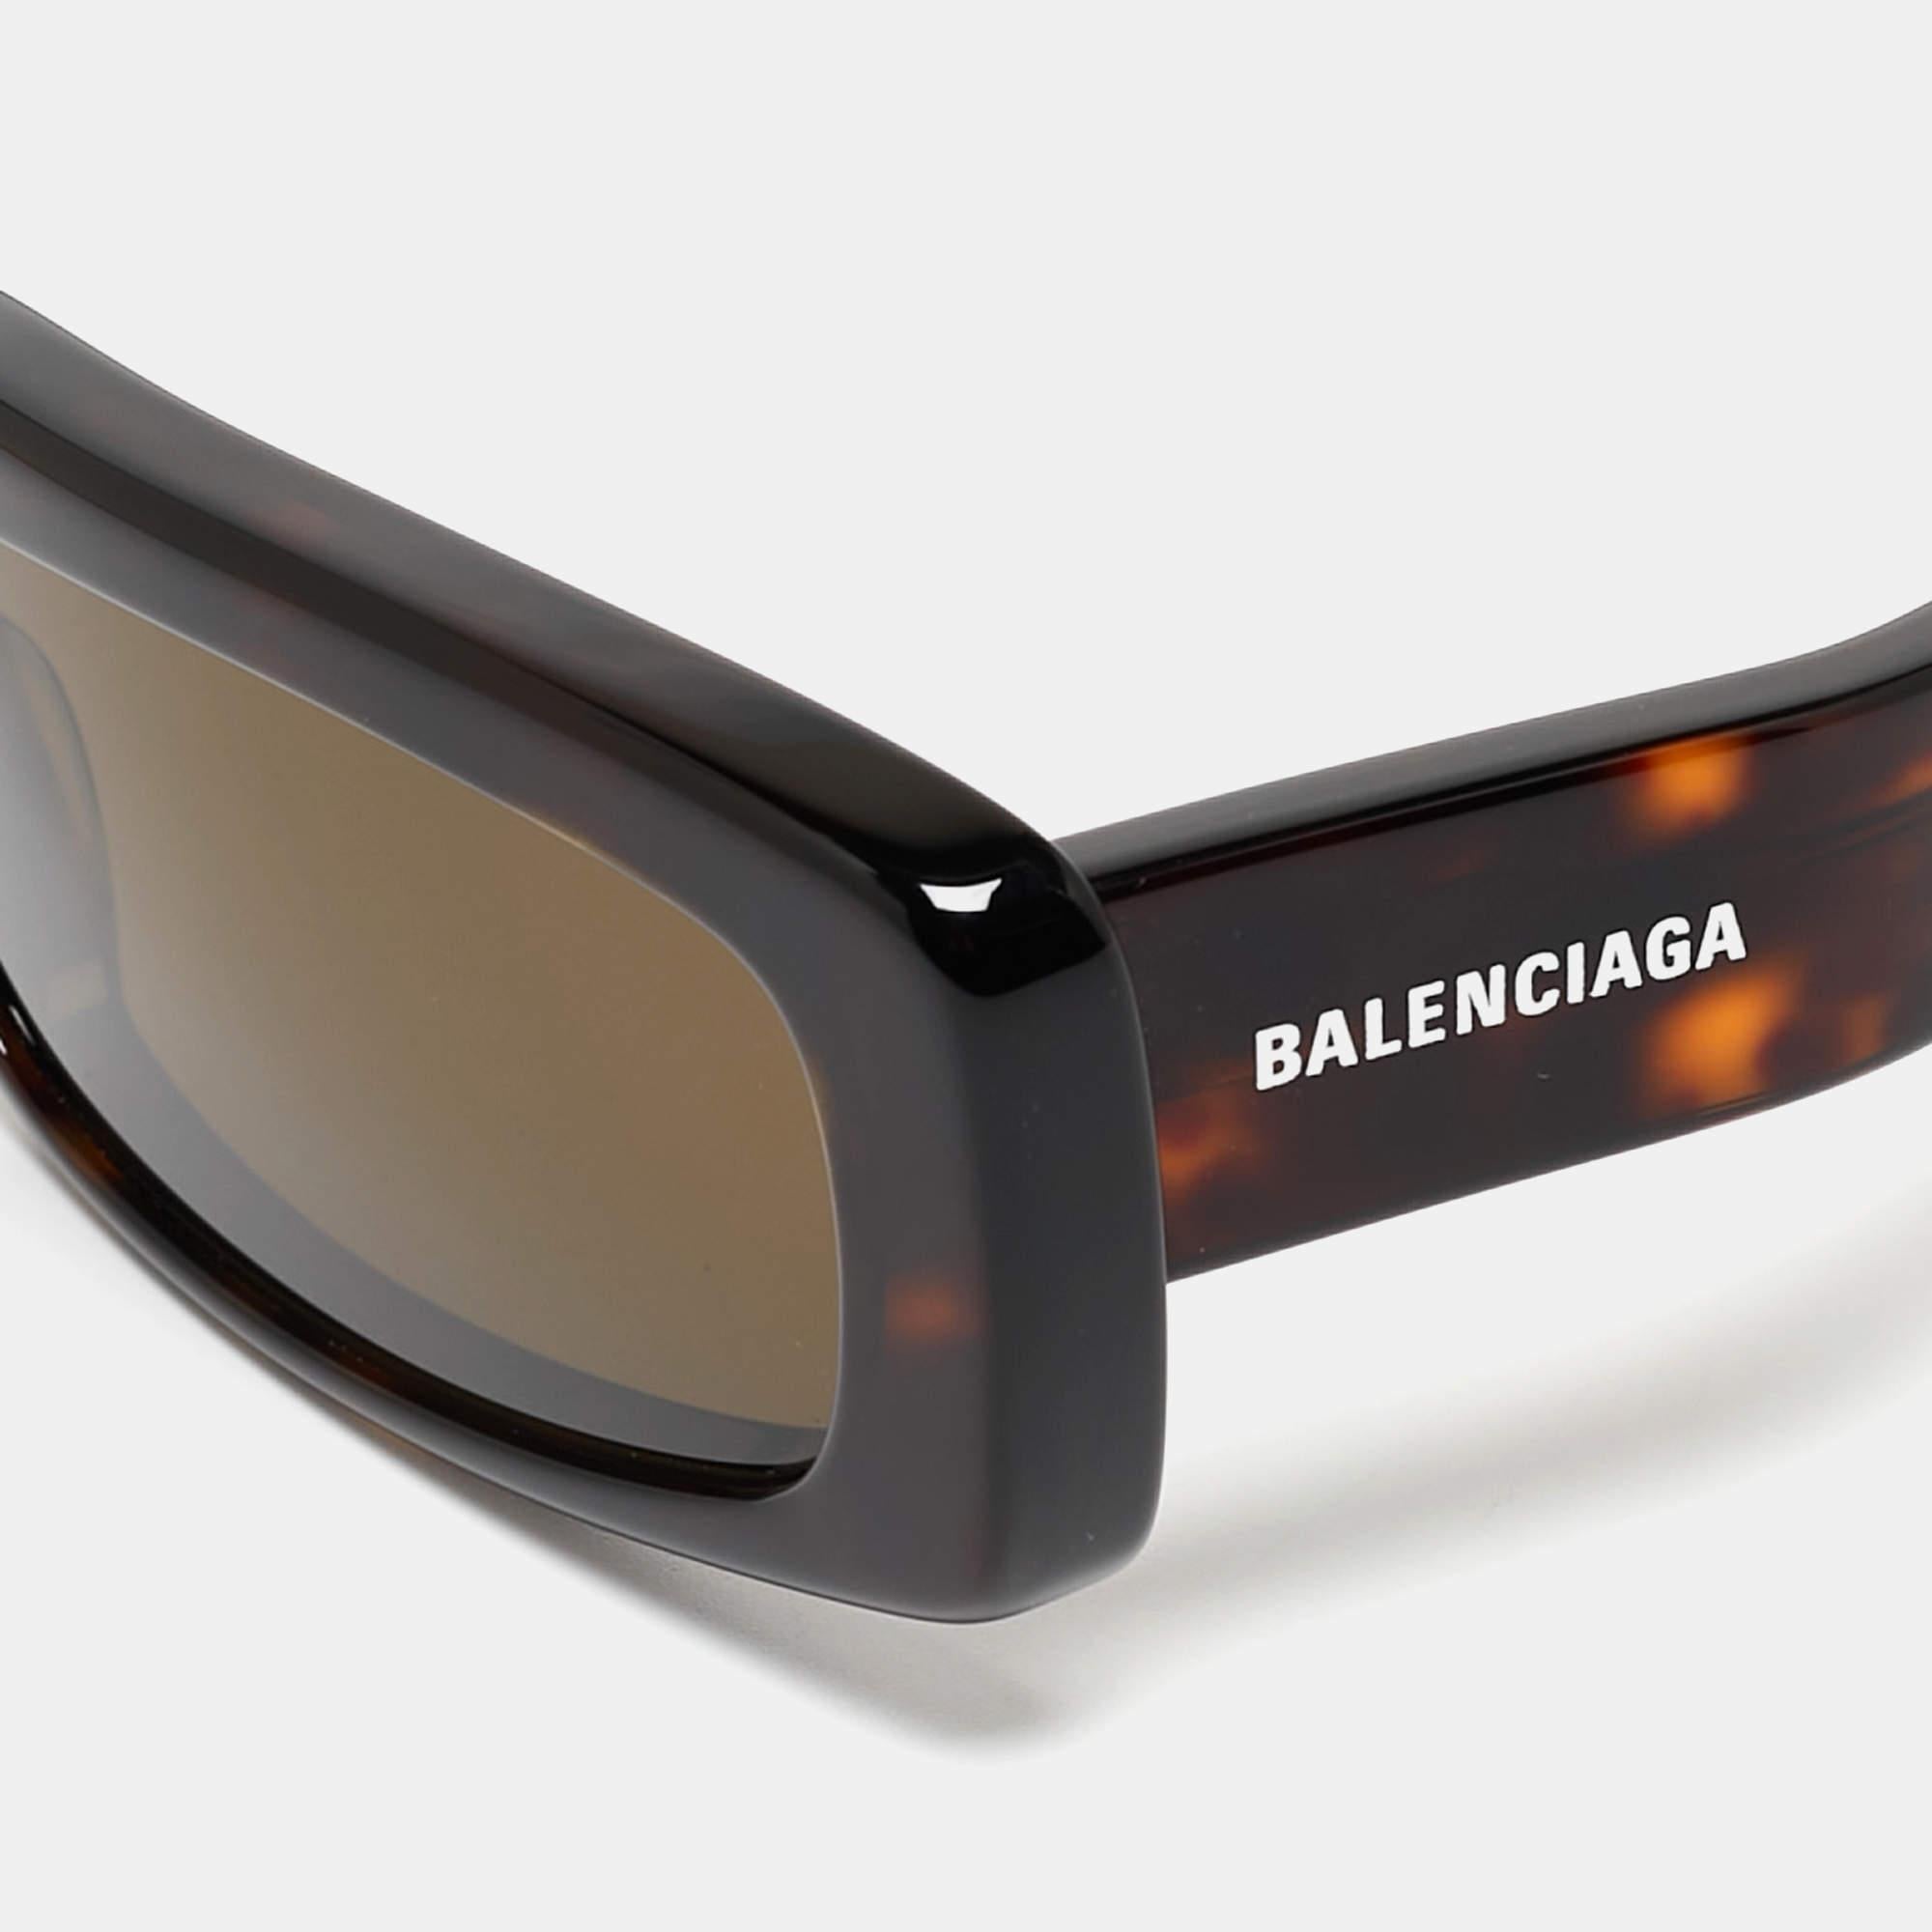 A statement pair of sunglasses from Balenciaga will surely make a prized buy. Featuring a trendy frame and lenses meant to protect your eyes, the sunglasses are ideal for all-day wear.

Bridge Size: 18 mm
Eye Size: 69 mm
Temple Length: 140 mm
